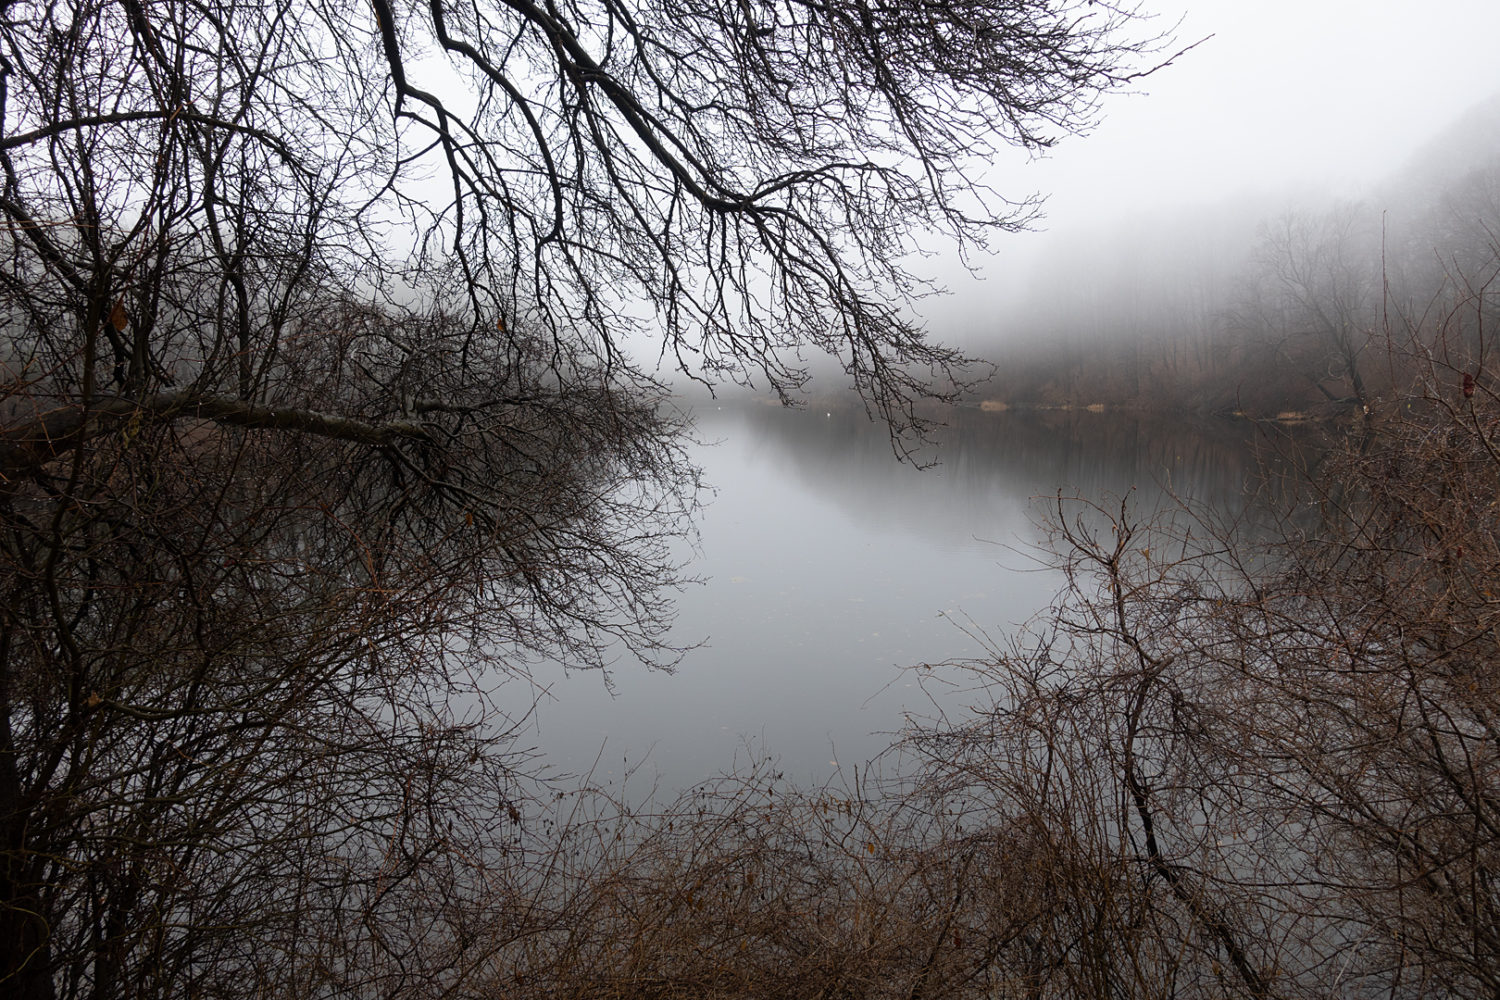 Two swans on Durand Lake in December fog